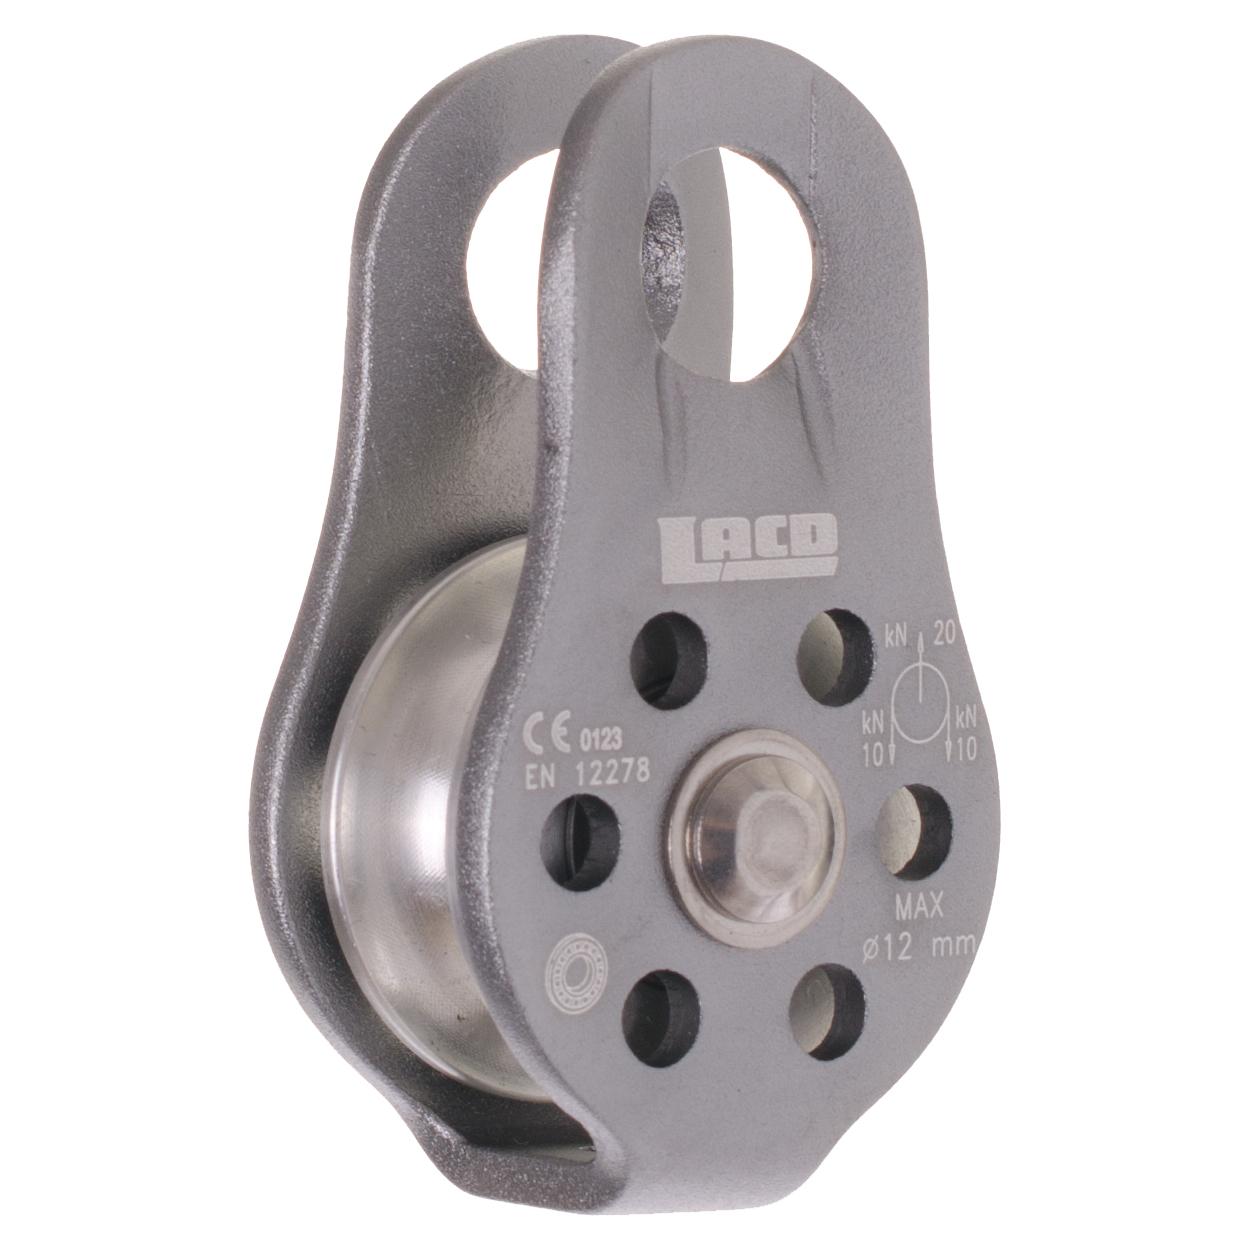 Foto LACD Pulley Fix Polea small, ball bearing gris